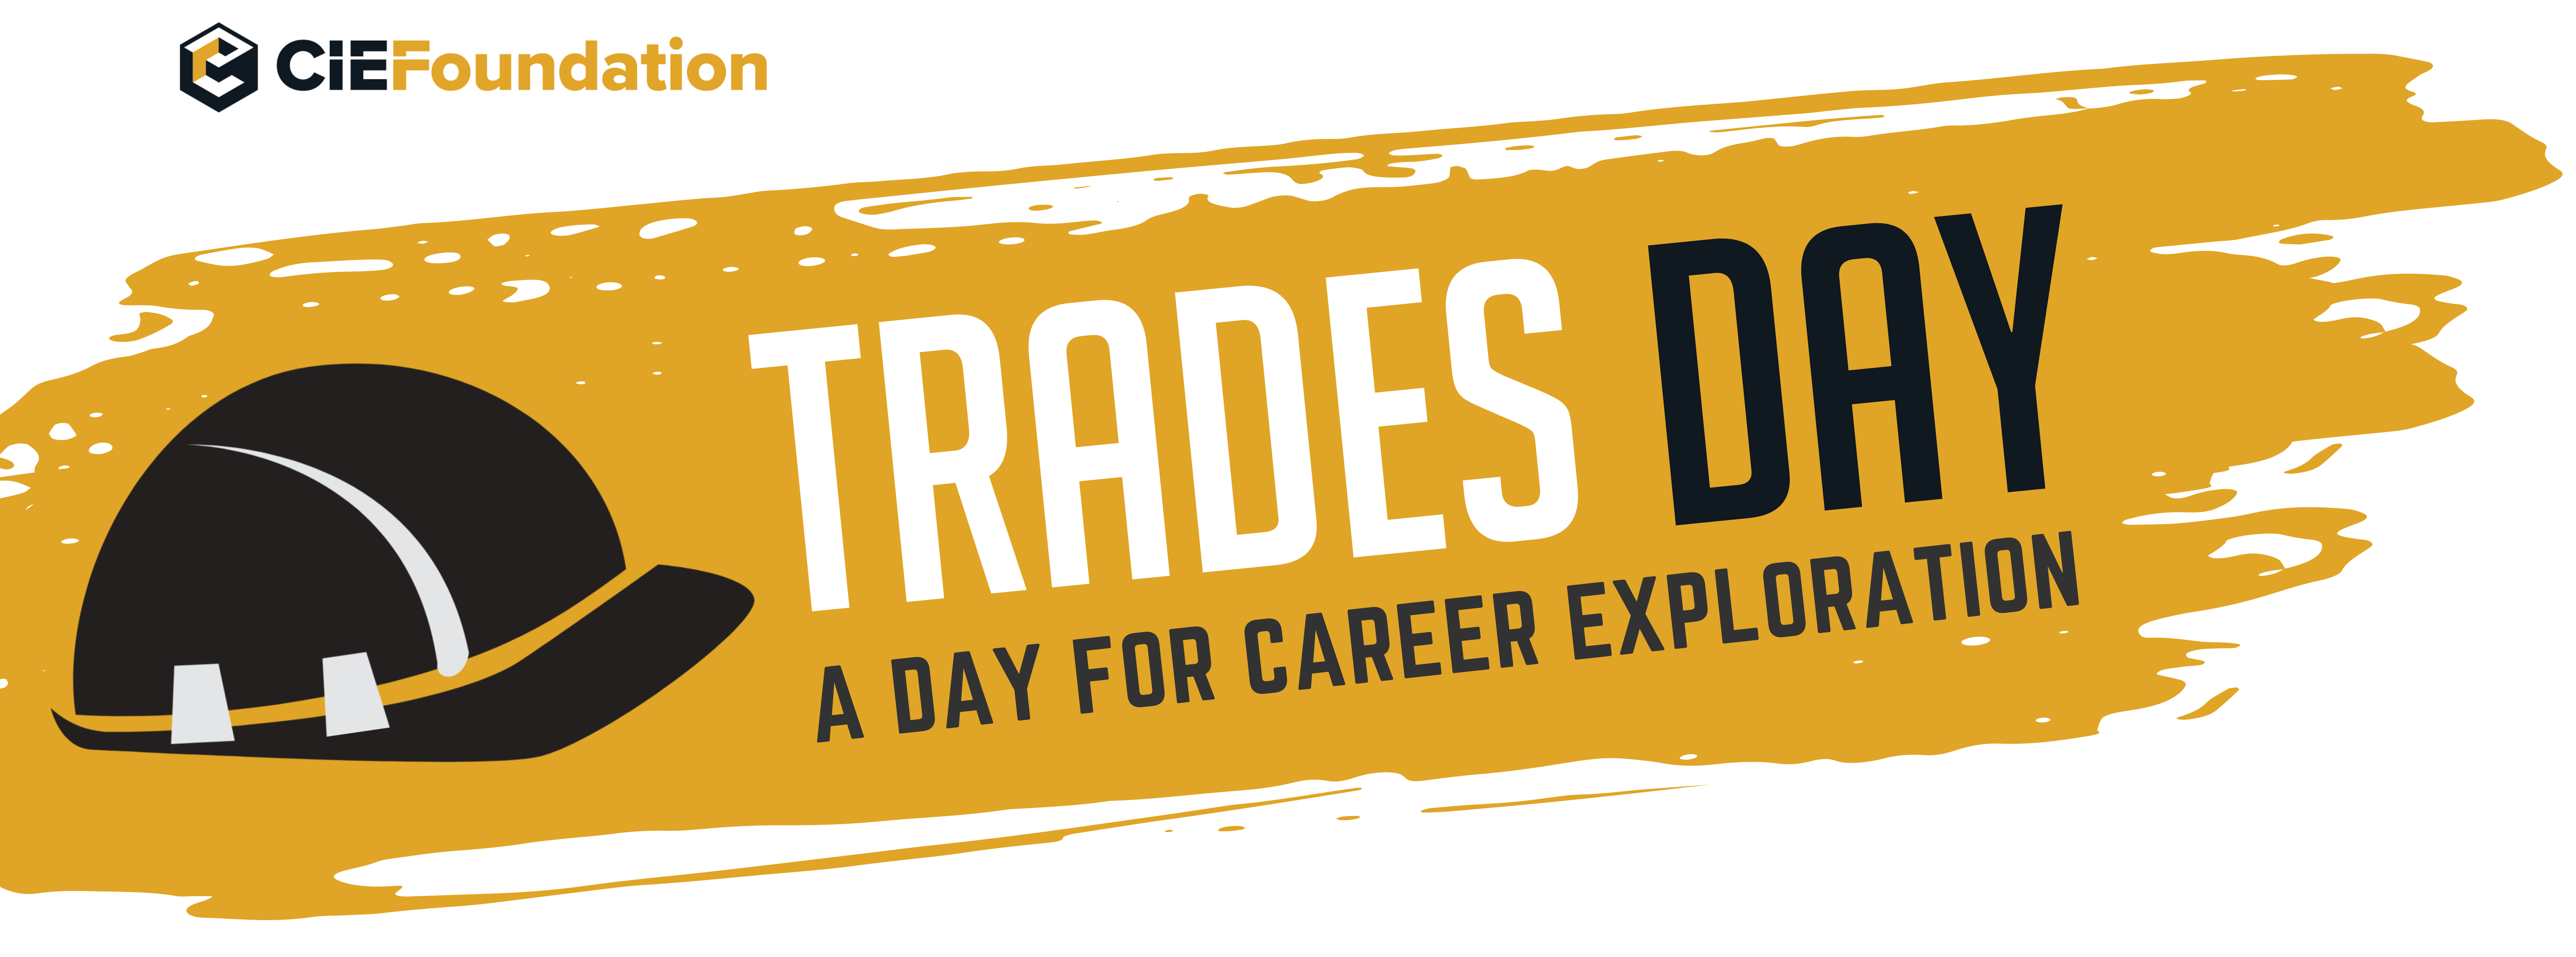 Trades Day banner